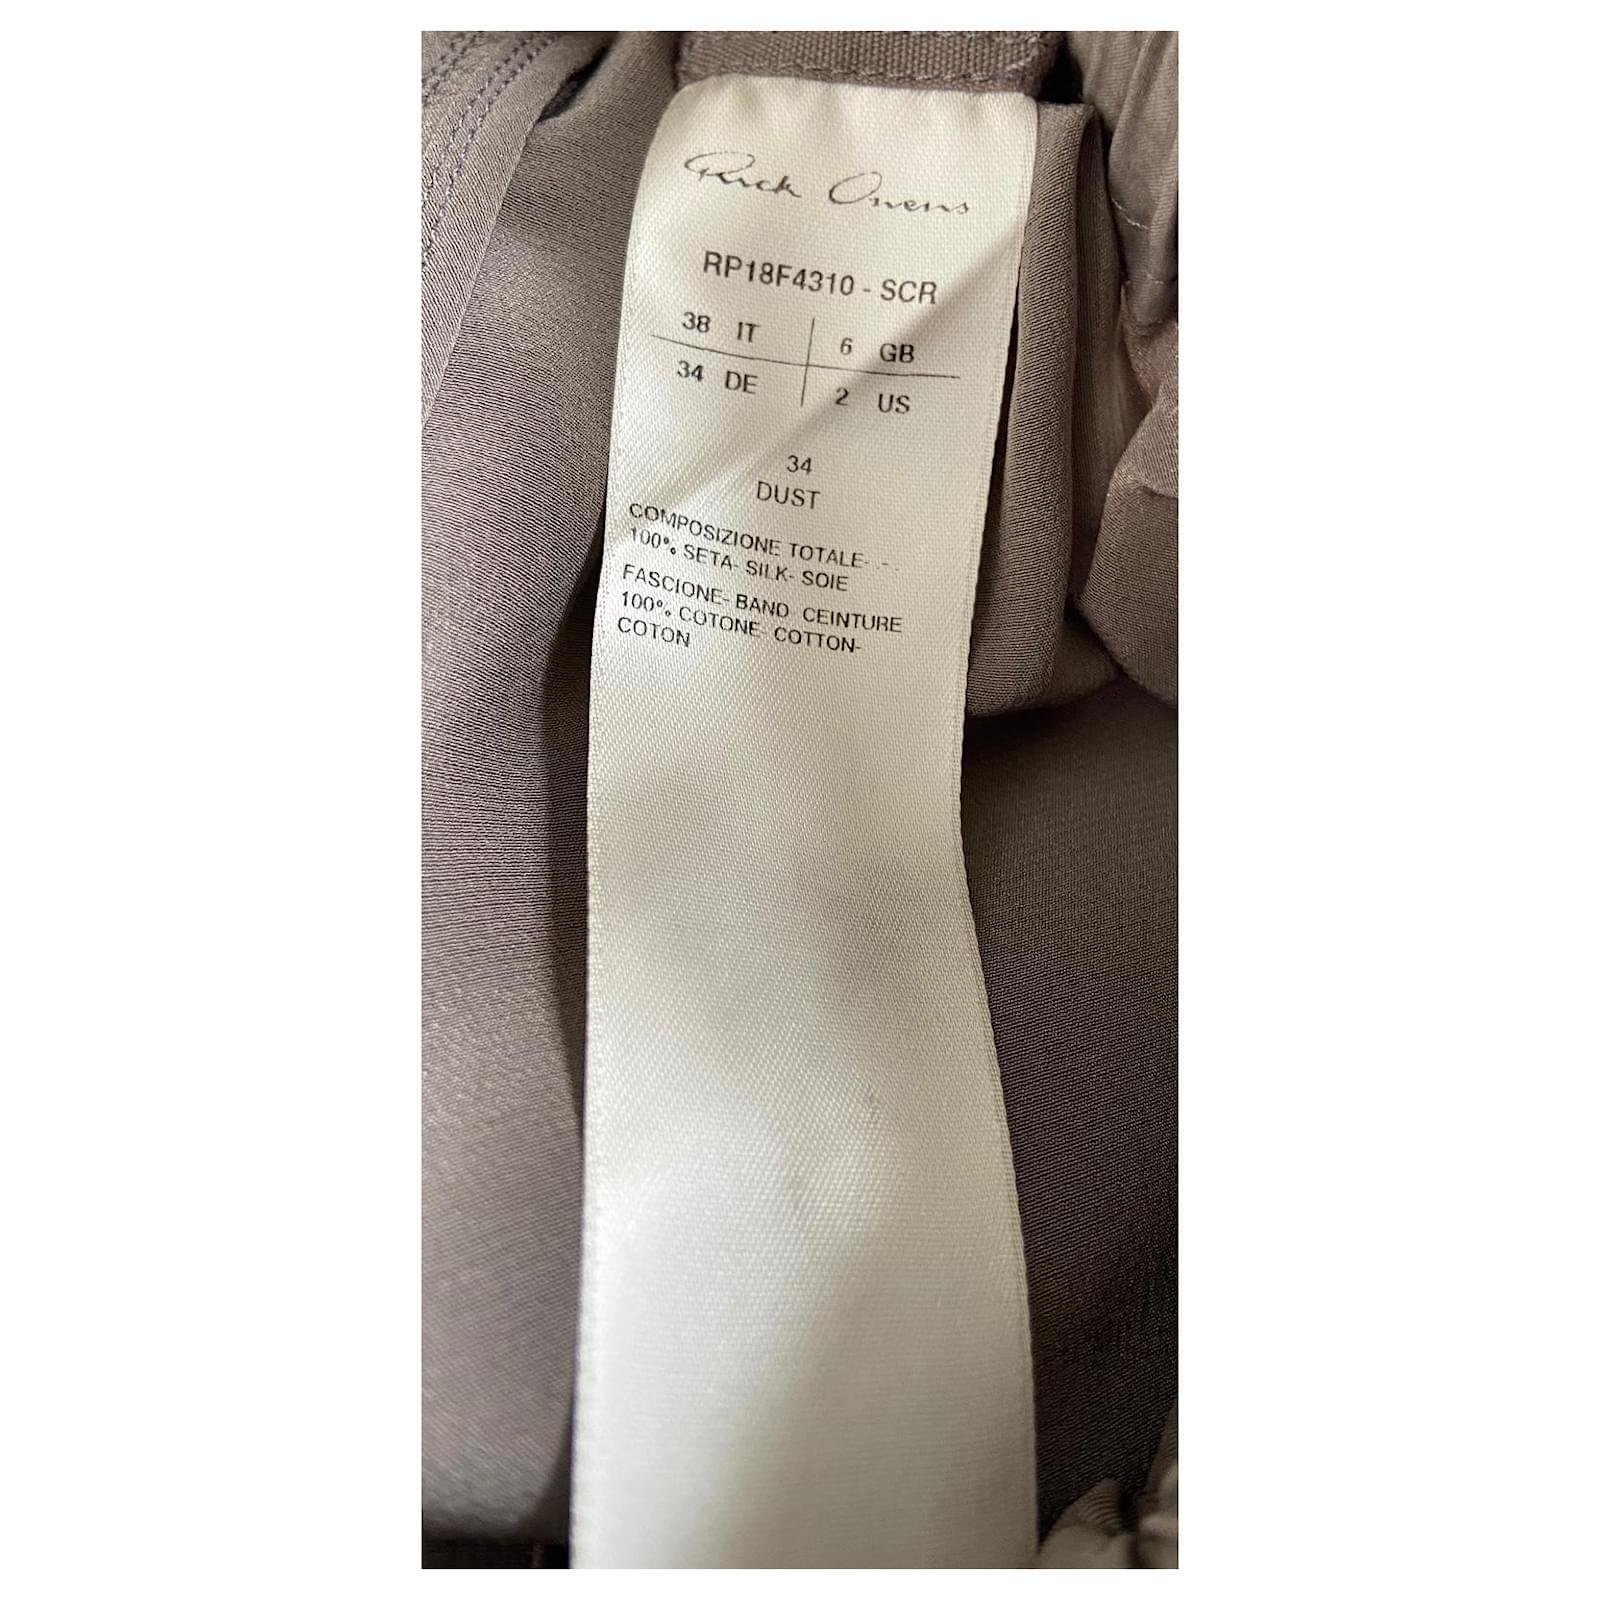 Rick Owens SS18 Sisyphus Dust Silk Pods Shorts For Sale 1